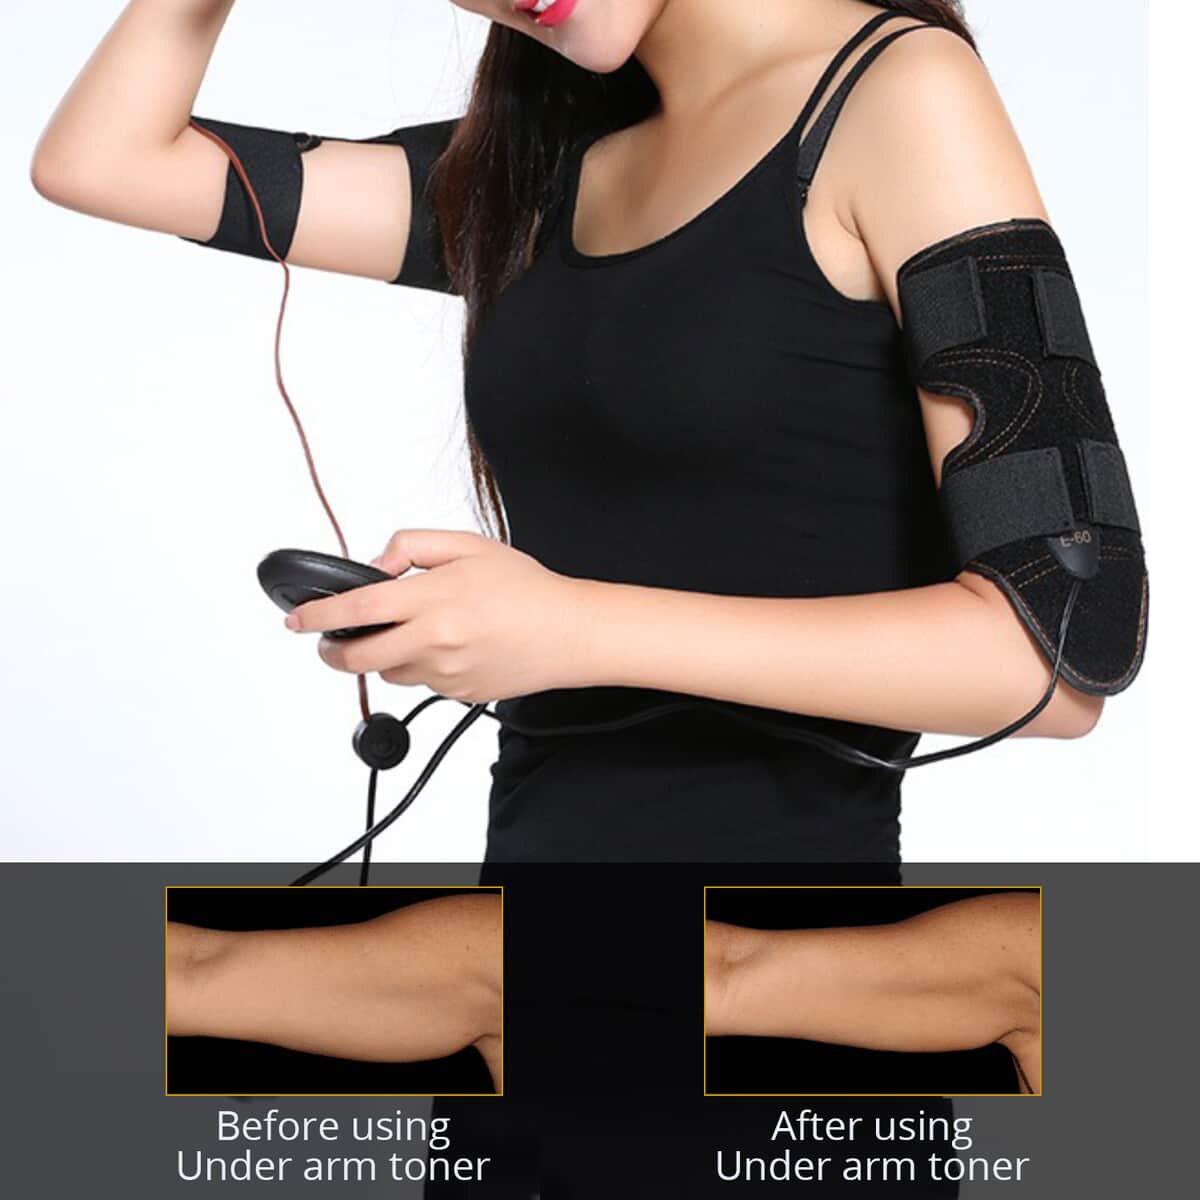 Evertone Bionic Arm Under Arm Toner, Rechargeable Remote Controlled Arm Toner With 10 Training Modes image number 1